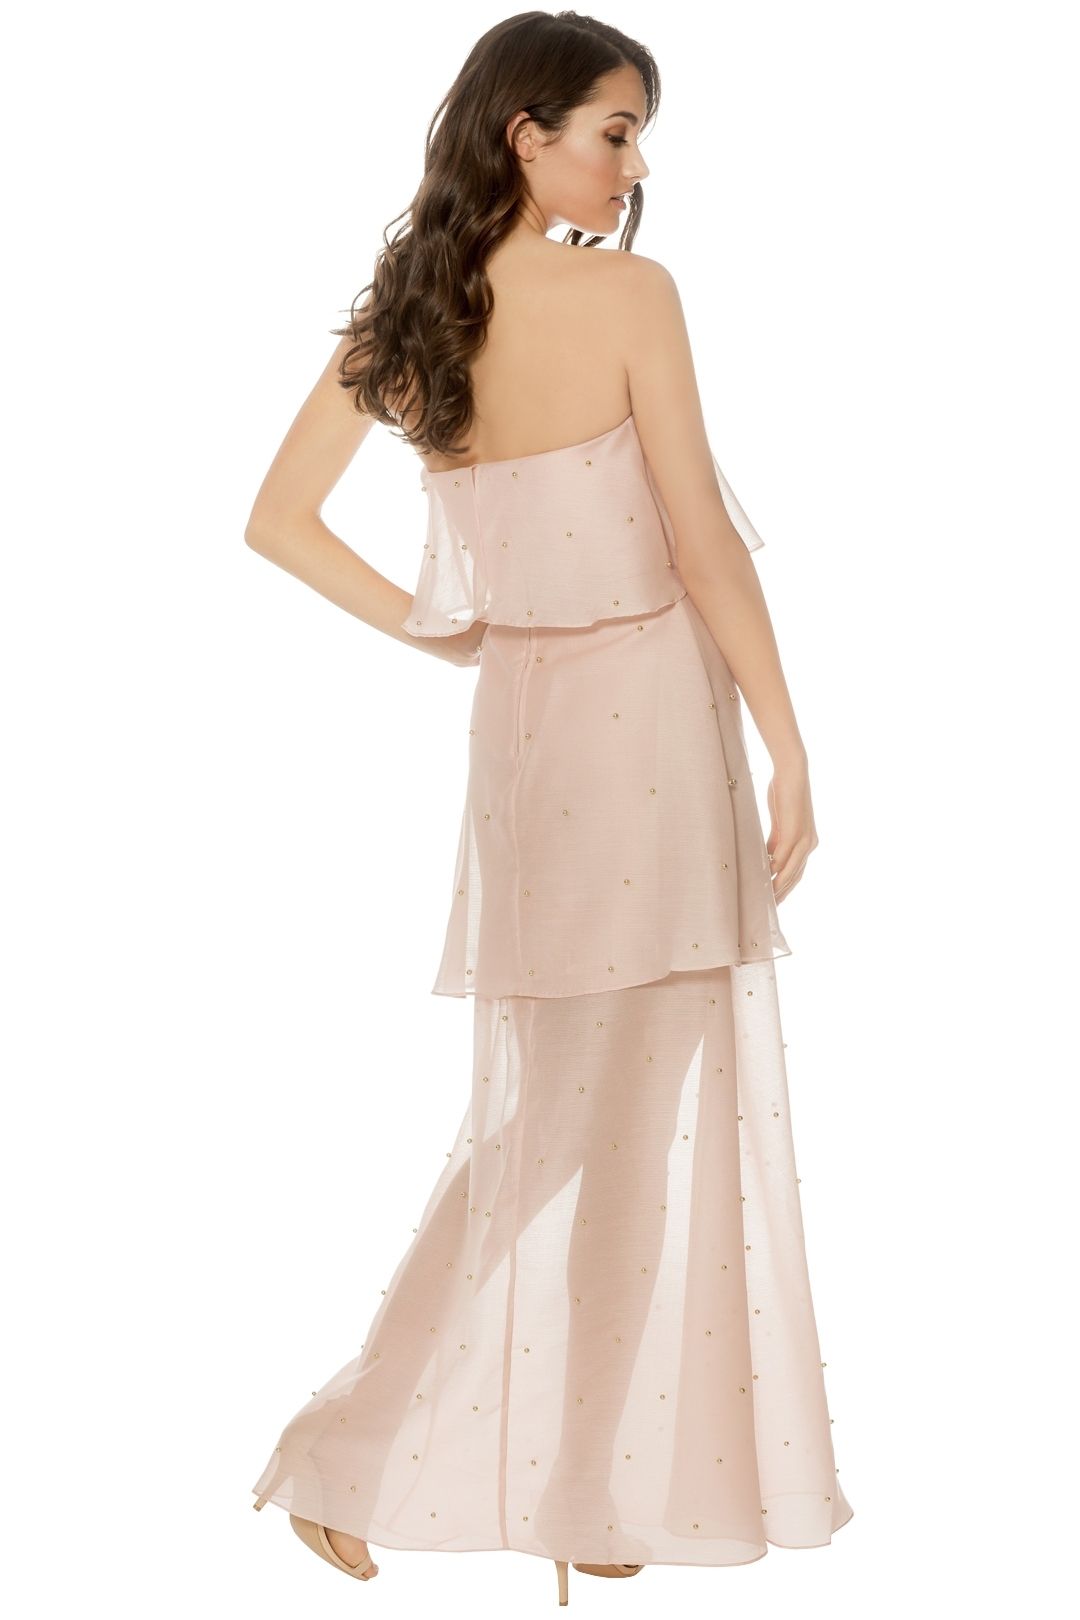 Keepsake The Label - Call Me Gown - Blush - Back